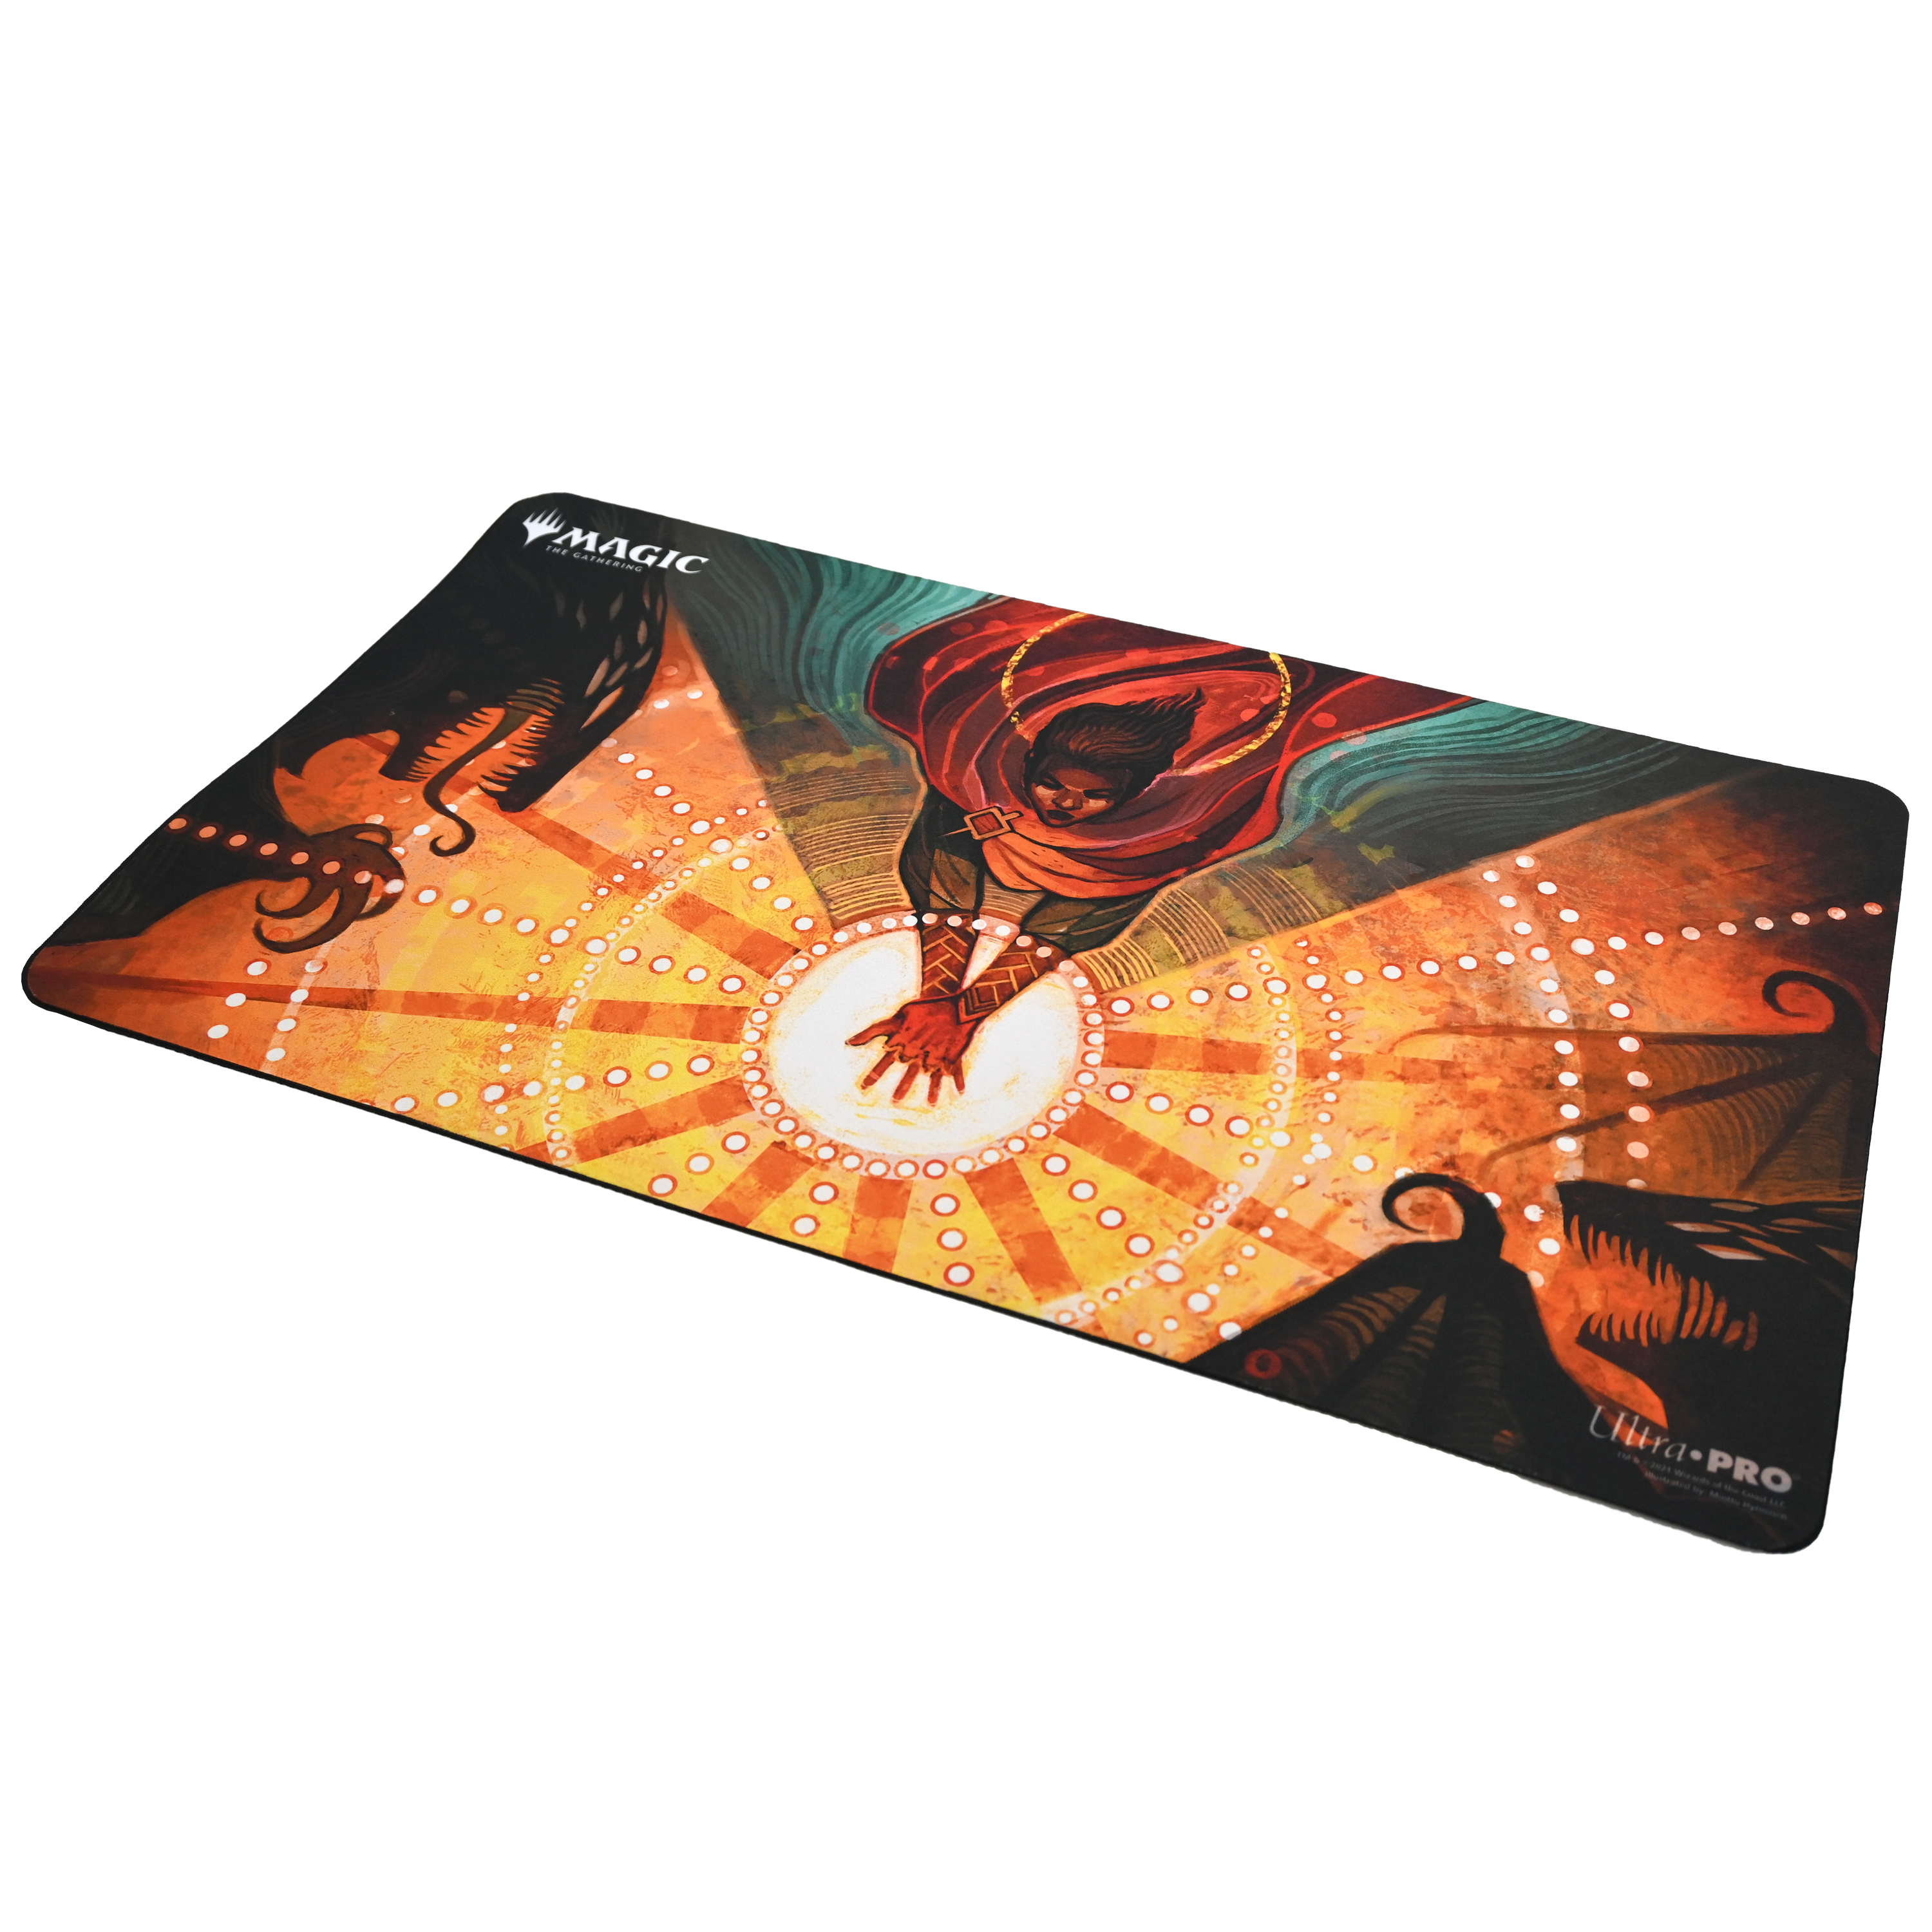 Ultra Pro Mystical Archive Collection Playmats | Silver Goblin